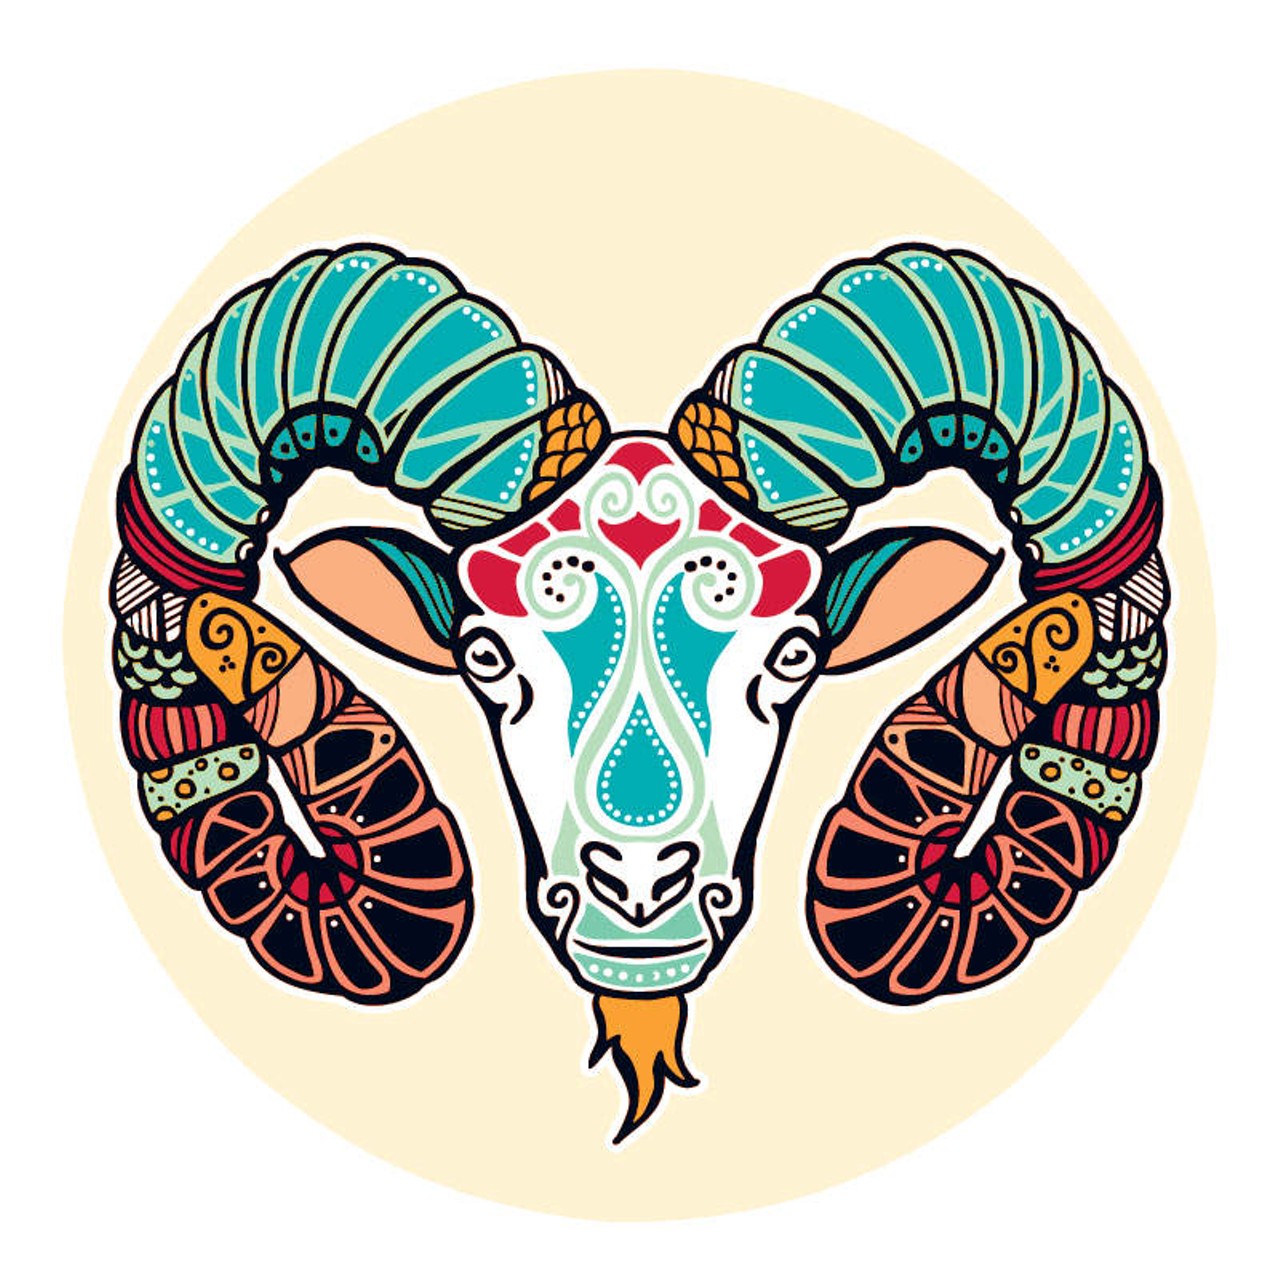 ARIES (March 21- April 20): 
It&#146;s hard to know what to say to you all. Many of you are feeling the fire of new life and a desire to reinvent yourself. Others have just about had it and are feeling totally unwilling to go along with things that never seem to work out. Between the two poles the common ground seems to be enthusiasm, and/or the lack of it. If you&#146;re not absolutely delighted with what&#146;s gong on you need to adjust your attitude or find something better to do. Nothing improves when we hate it. This isn&#146;t rocket science; make the choice to be here for this or drop it and go back to square one.